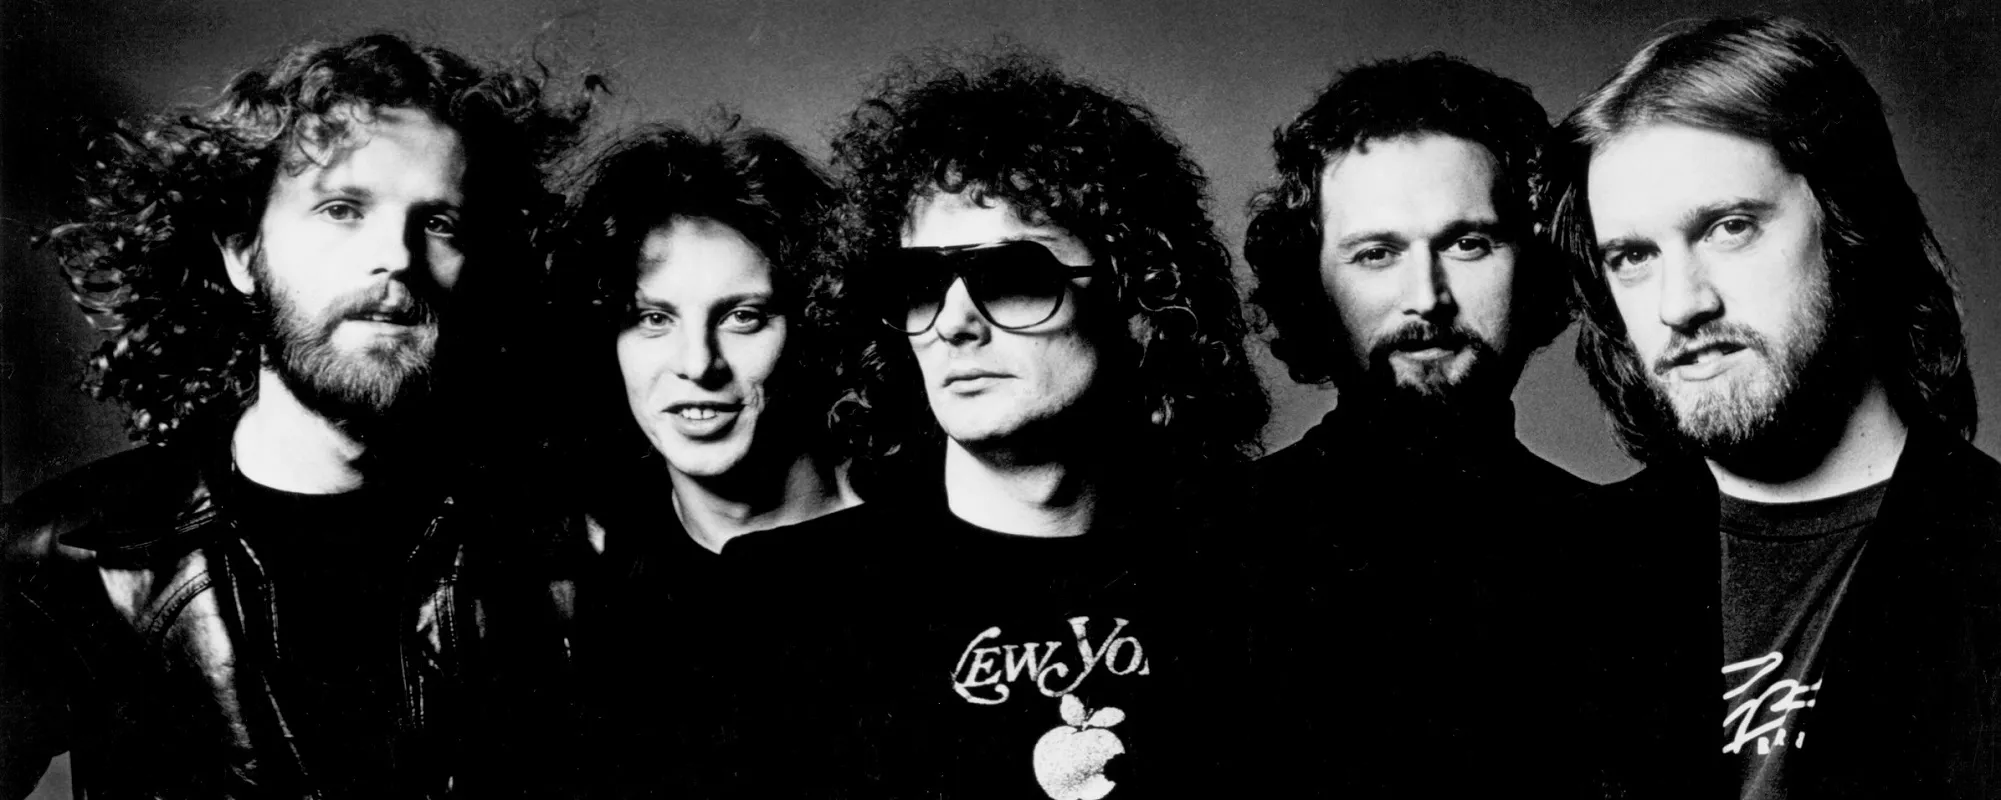 Myles Goodwyn, Frontman of the Canadian Rock Band April Wine, Dead at